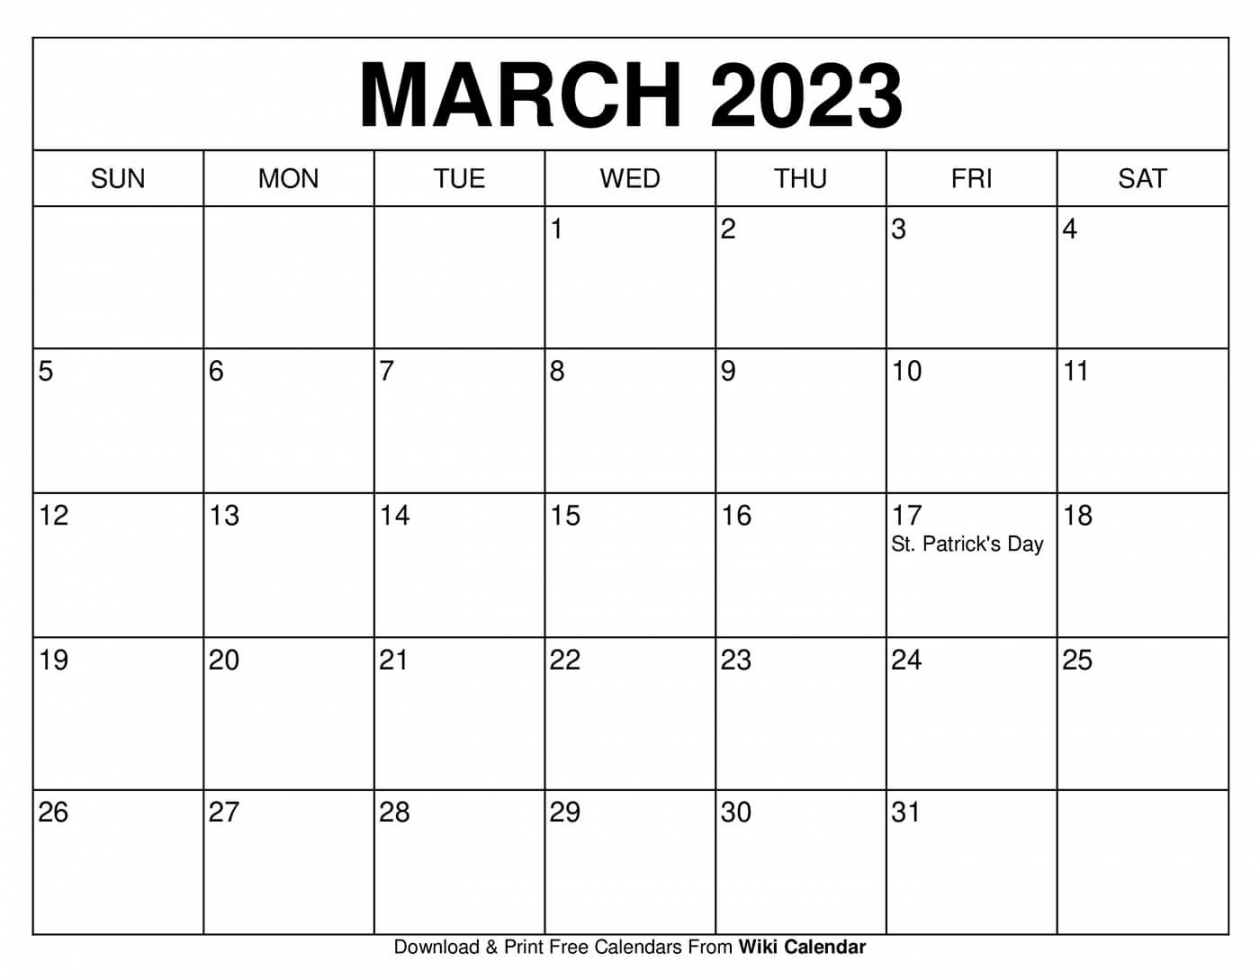 2023 Calendar Free Printable - Printable - Free Printable March  Calendar Templates With Holidays